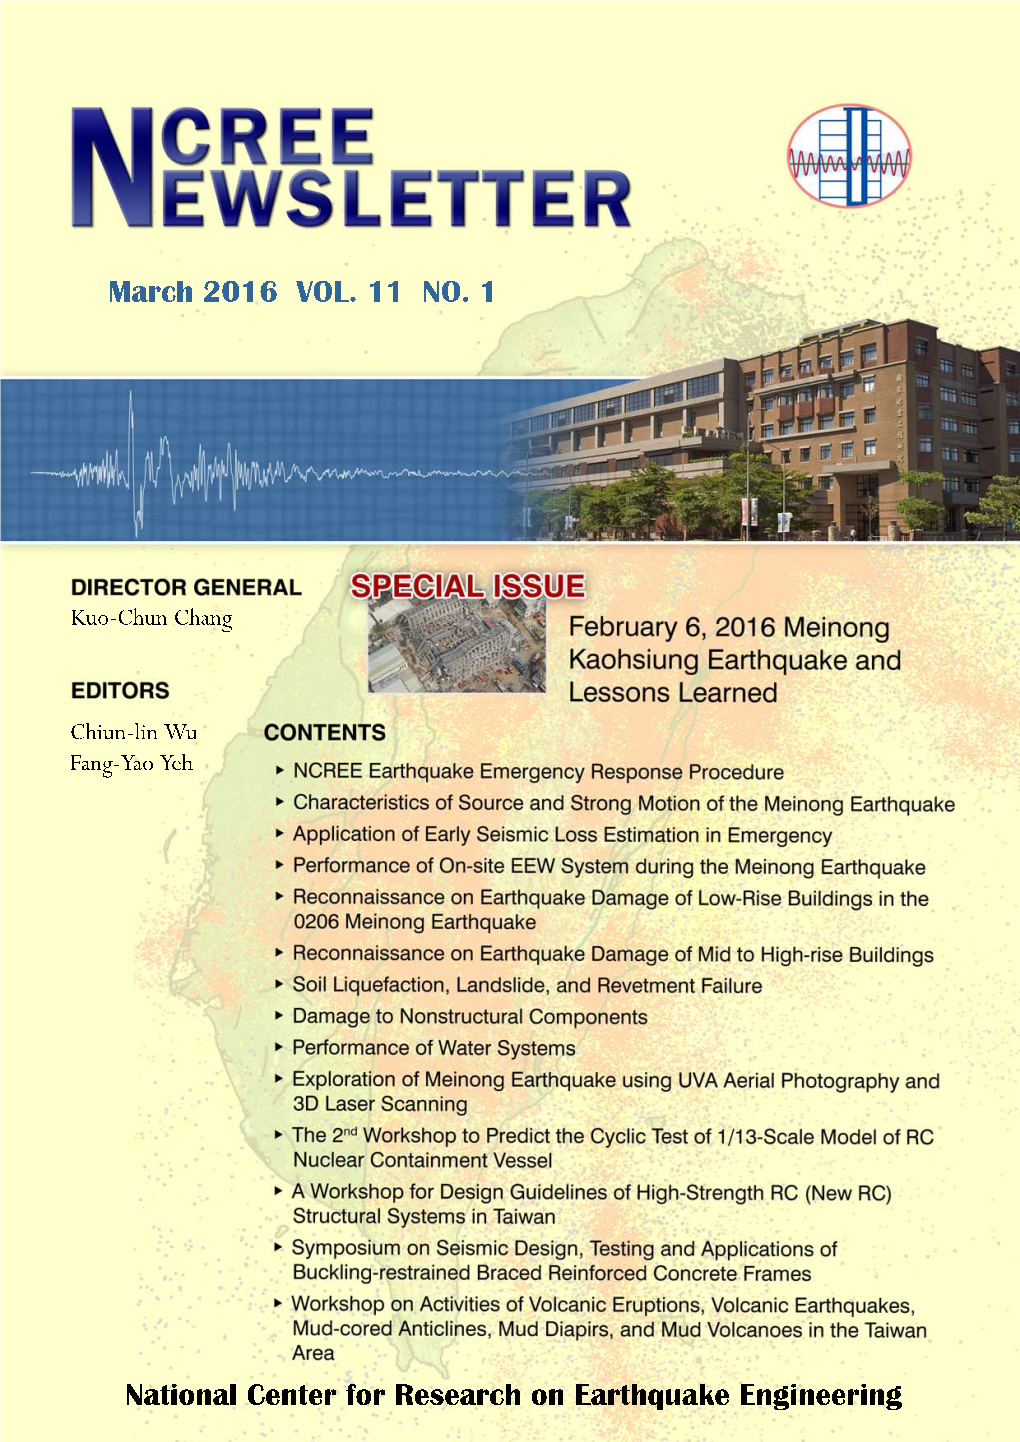 Special Issue: February 6, 2016 Meinong Kaohsiung Earthquake and Lessons Learned NCREE Earthquake Emergency Response Procedure